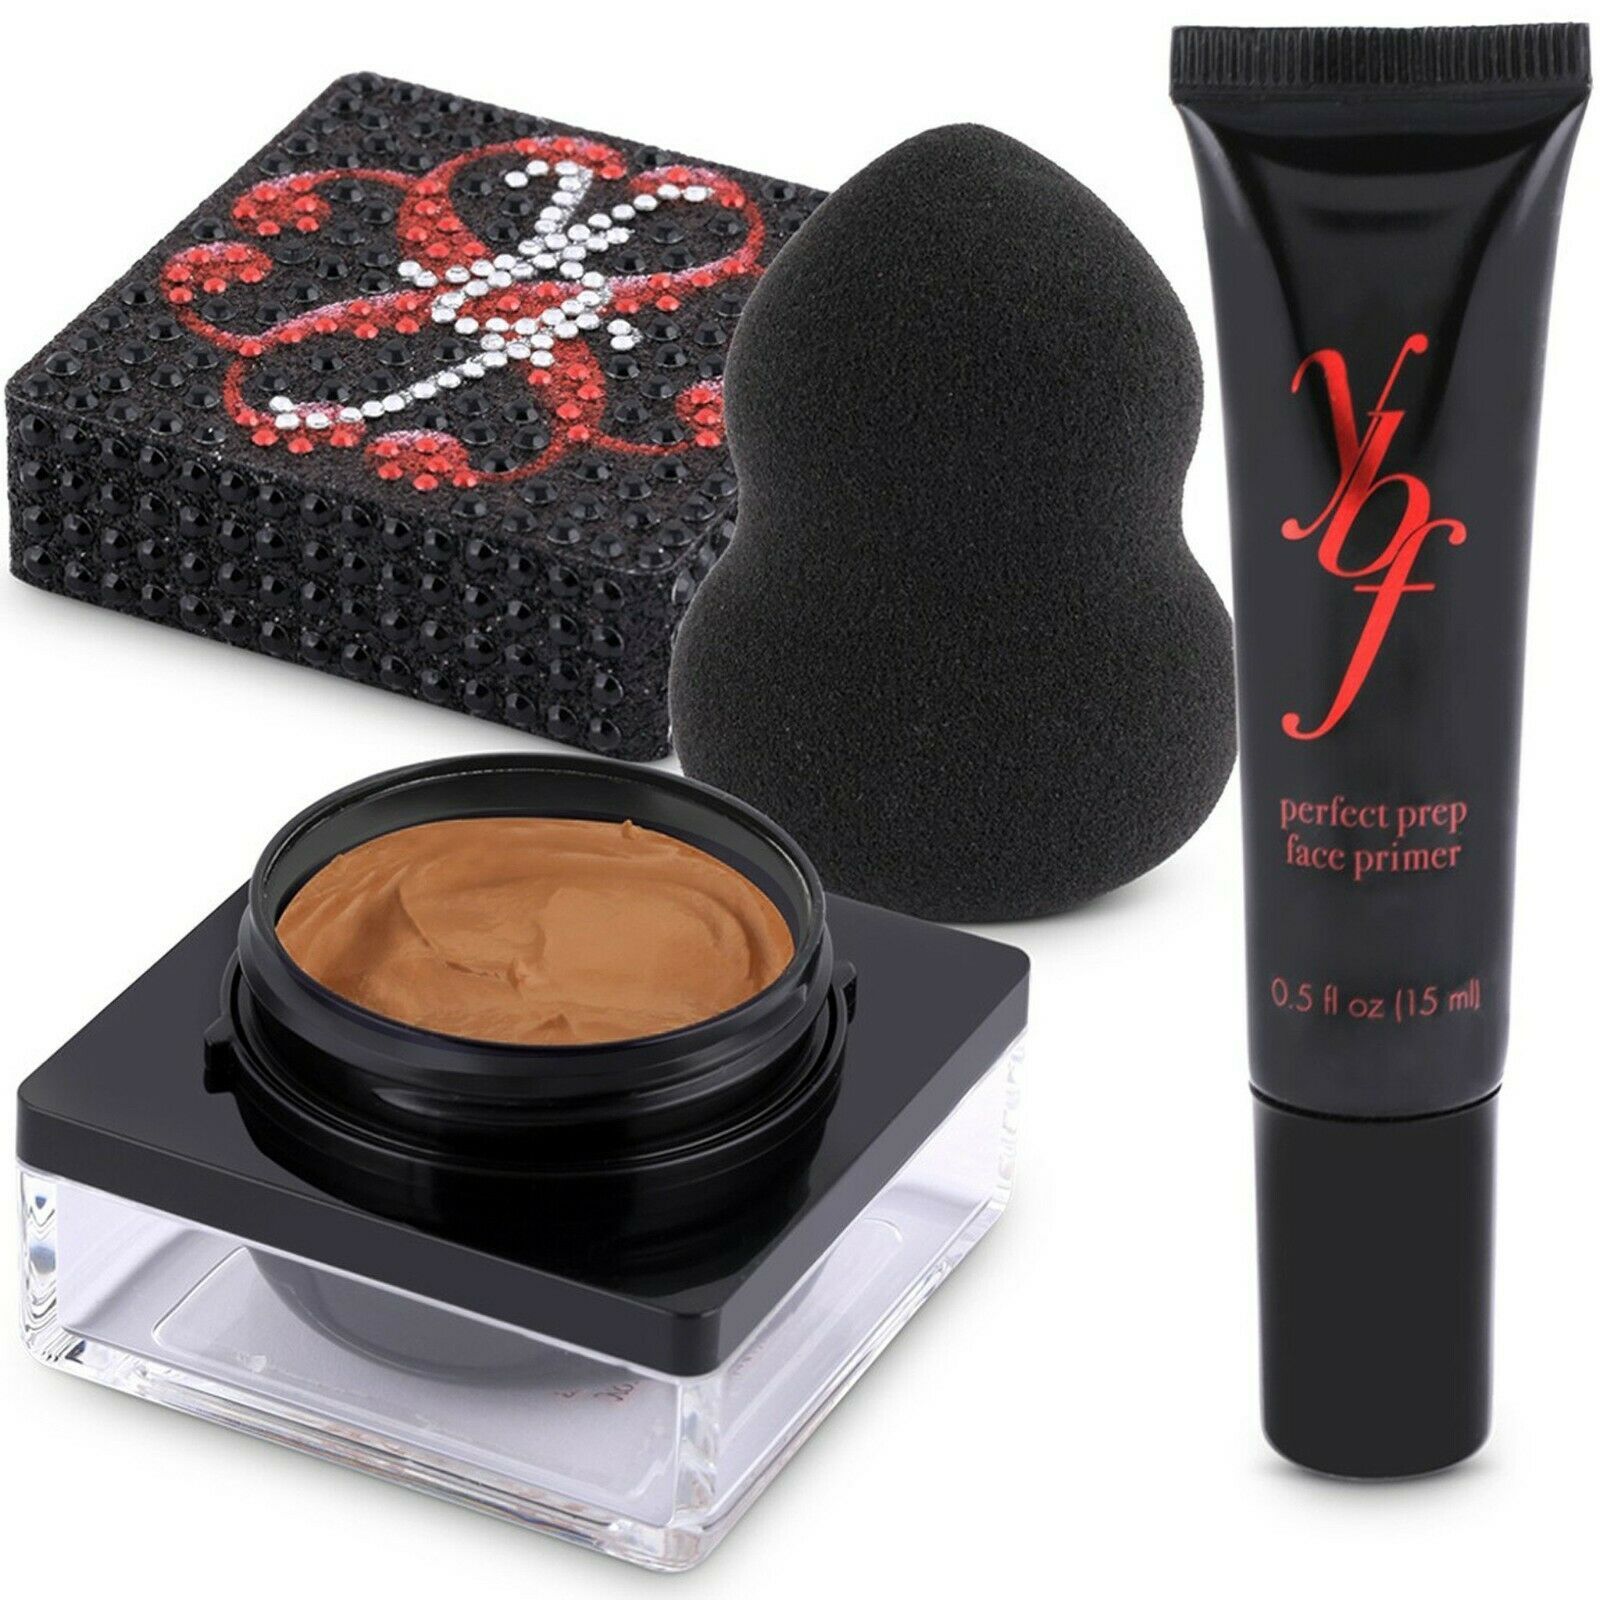 ybf Stupendous Souffle Foundation and Perfect Prep Face Primer, Deep - $28.04